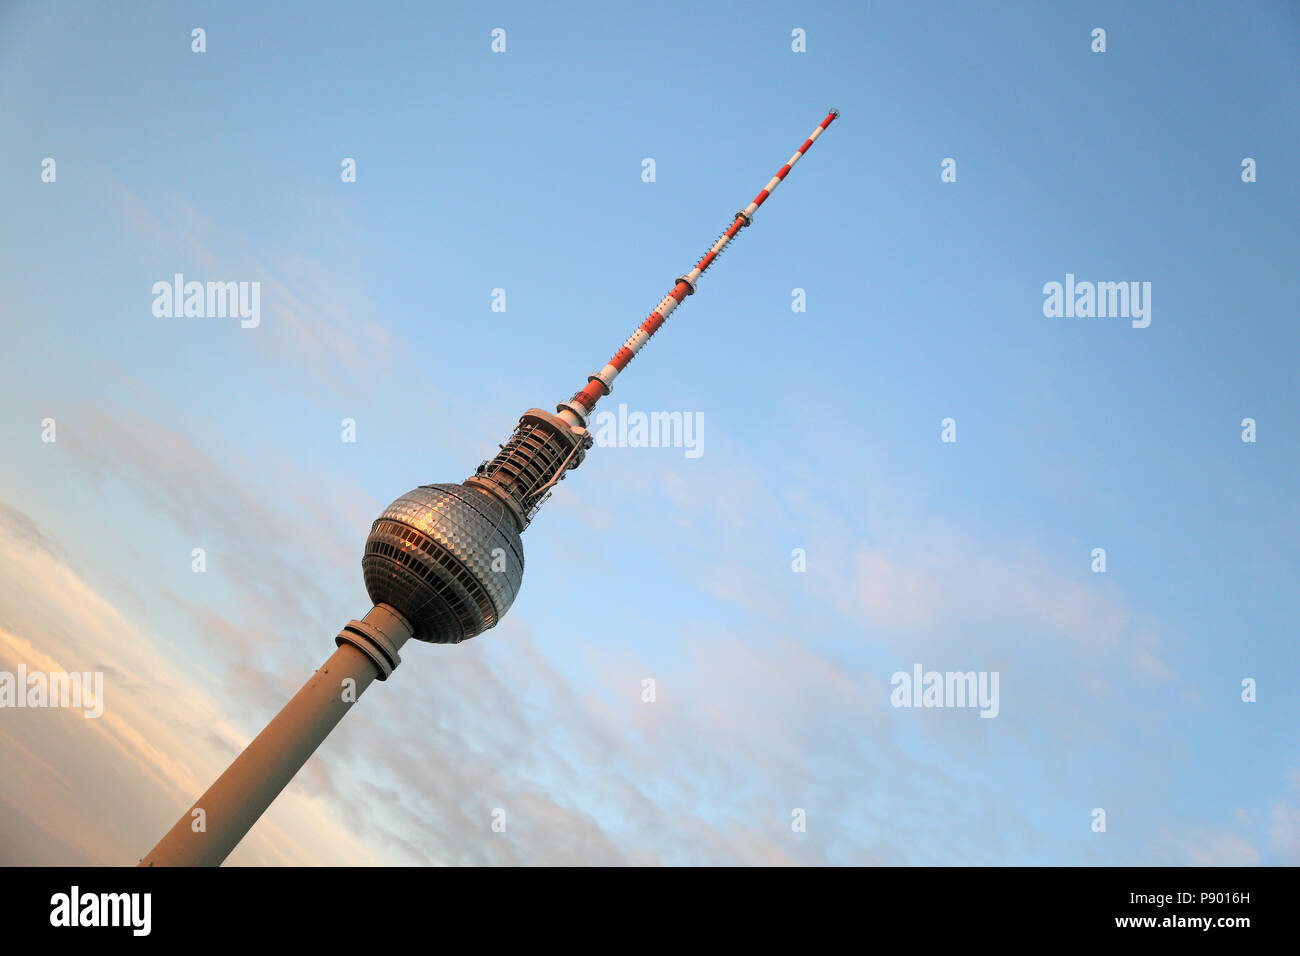 Berlin, Germany, the Berlin TV tower in the morning Stock Photo